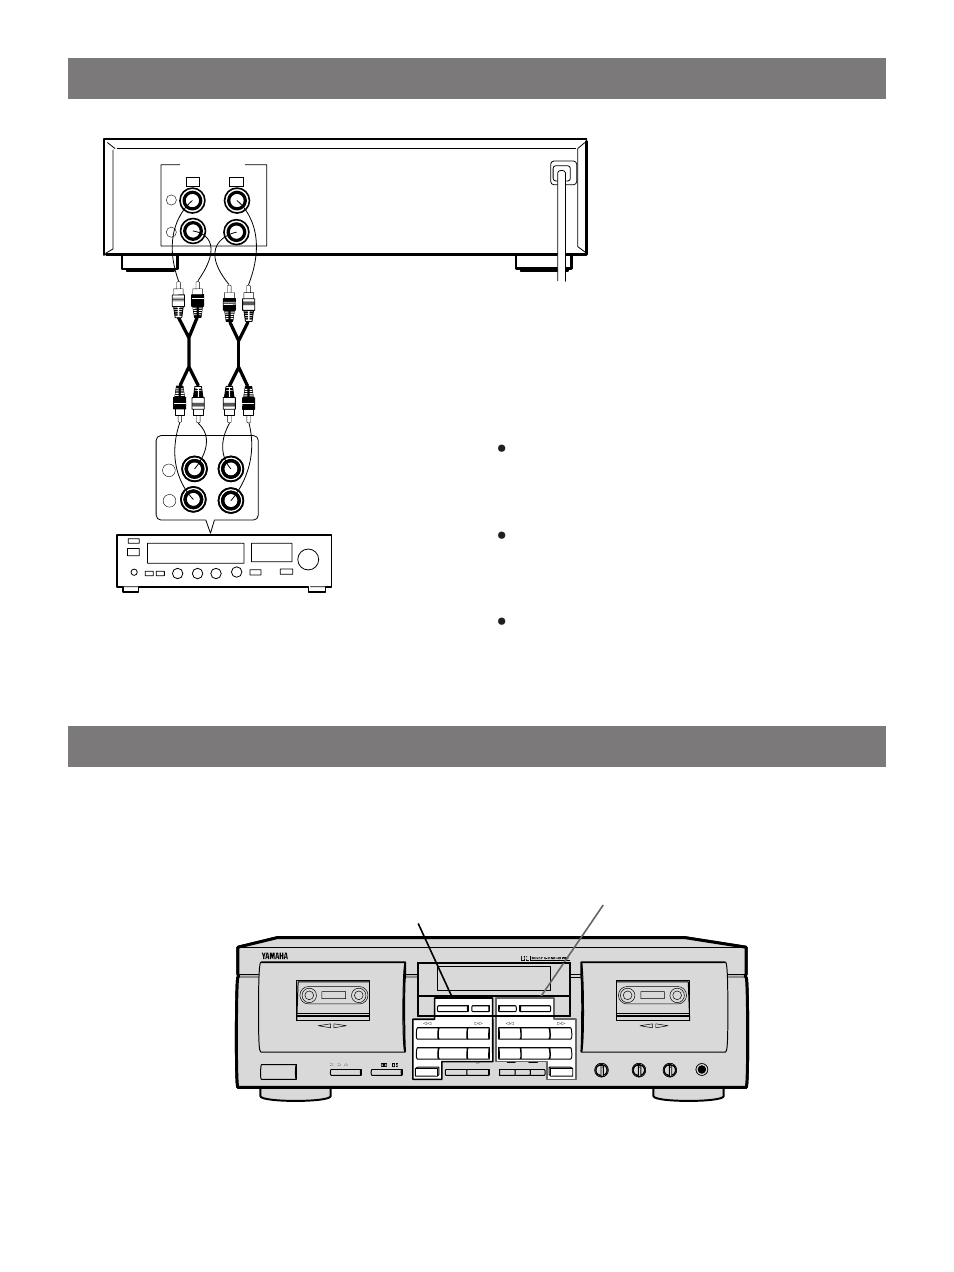 Connections, Notes on this manual, Example: kx-w592 | Amplifier or receiver | Yamaha KX-W492 User Manual | Page 4 / 20